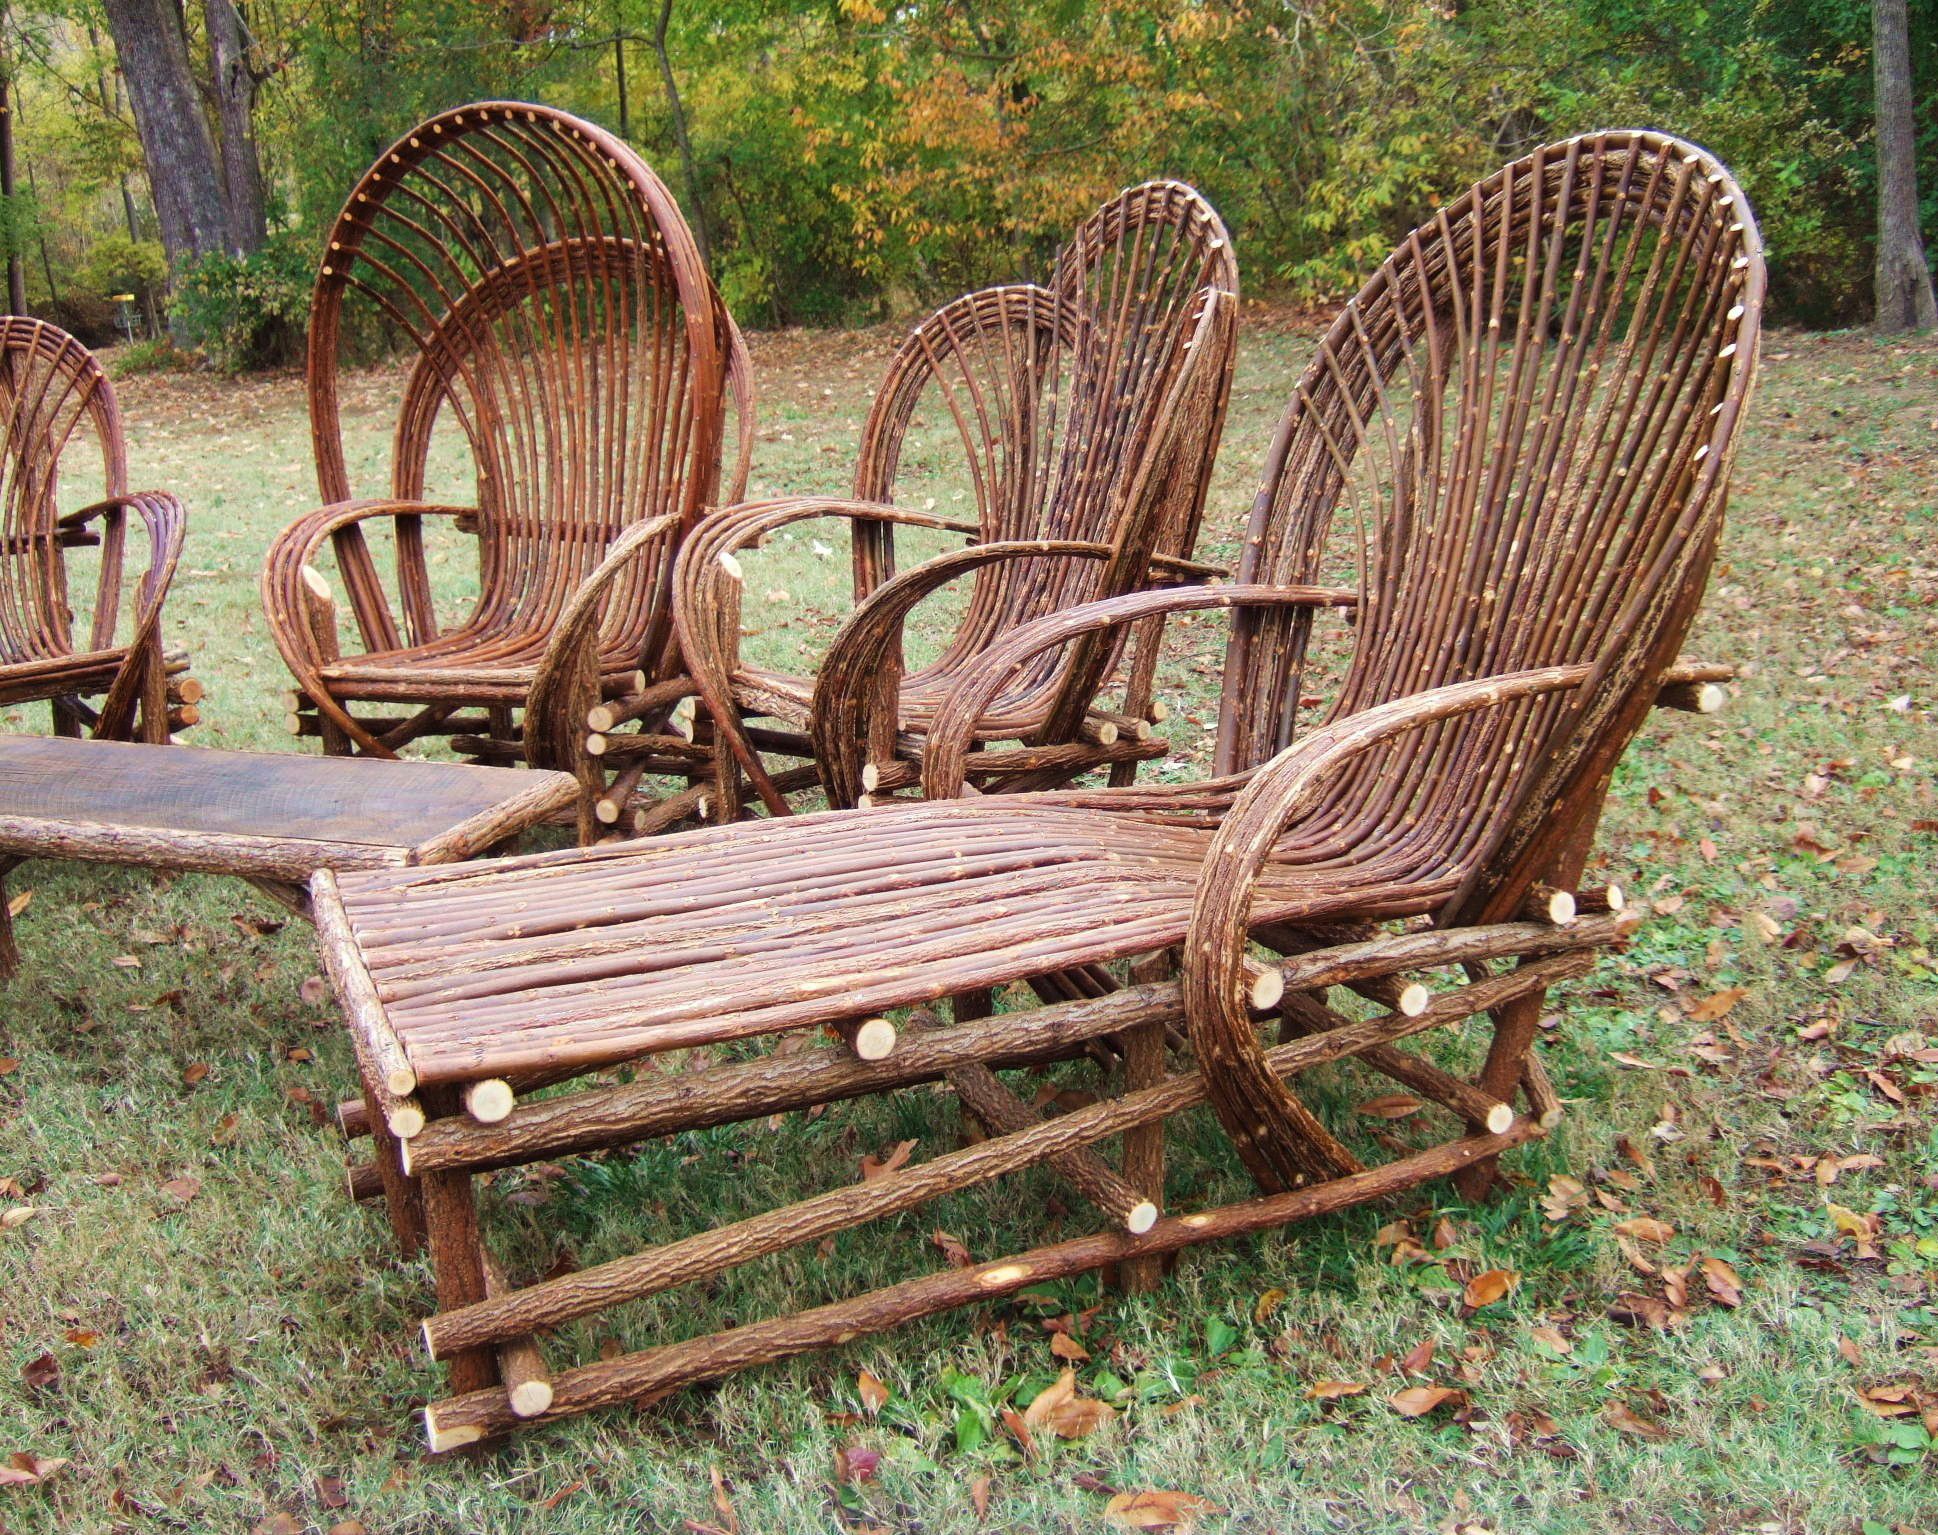 Willow woven seating photo